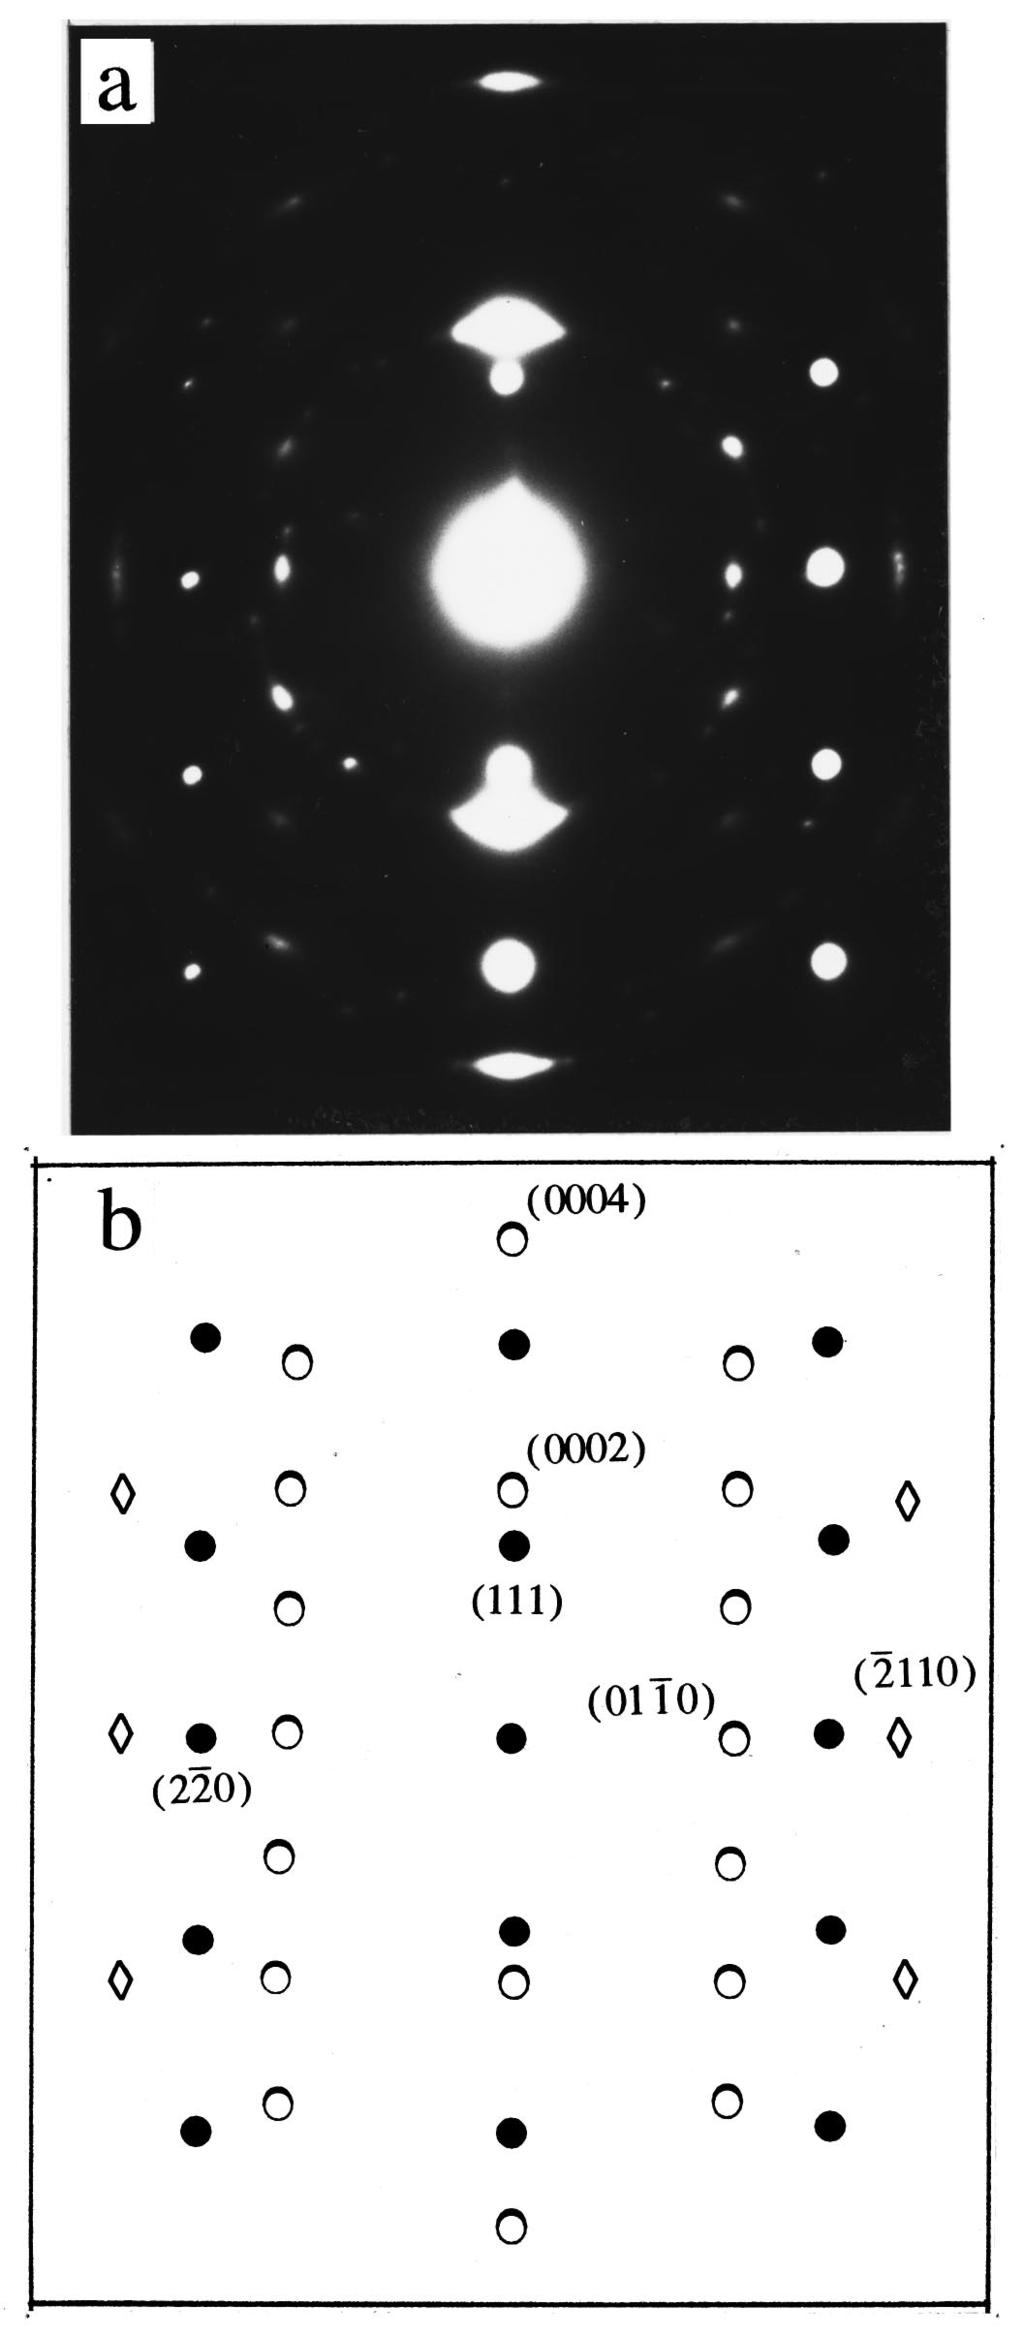 J. Appl. Phys., Vol. 85, No. 11, 1 June 1999 Auner et al. 7883 FIG. 7. A high resolution TEM image near the AlN/Si interface region of the AlN film grown at 600 C, with electron beam parallel to Si 011.